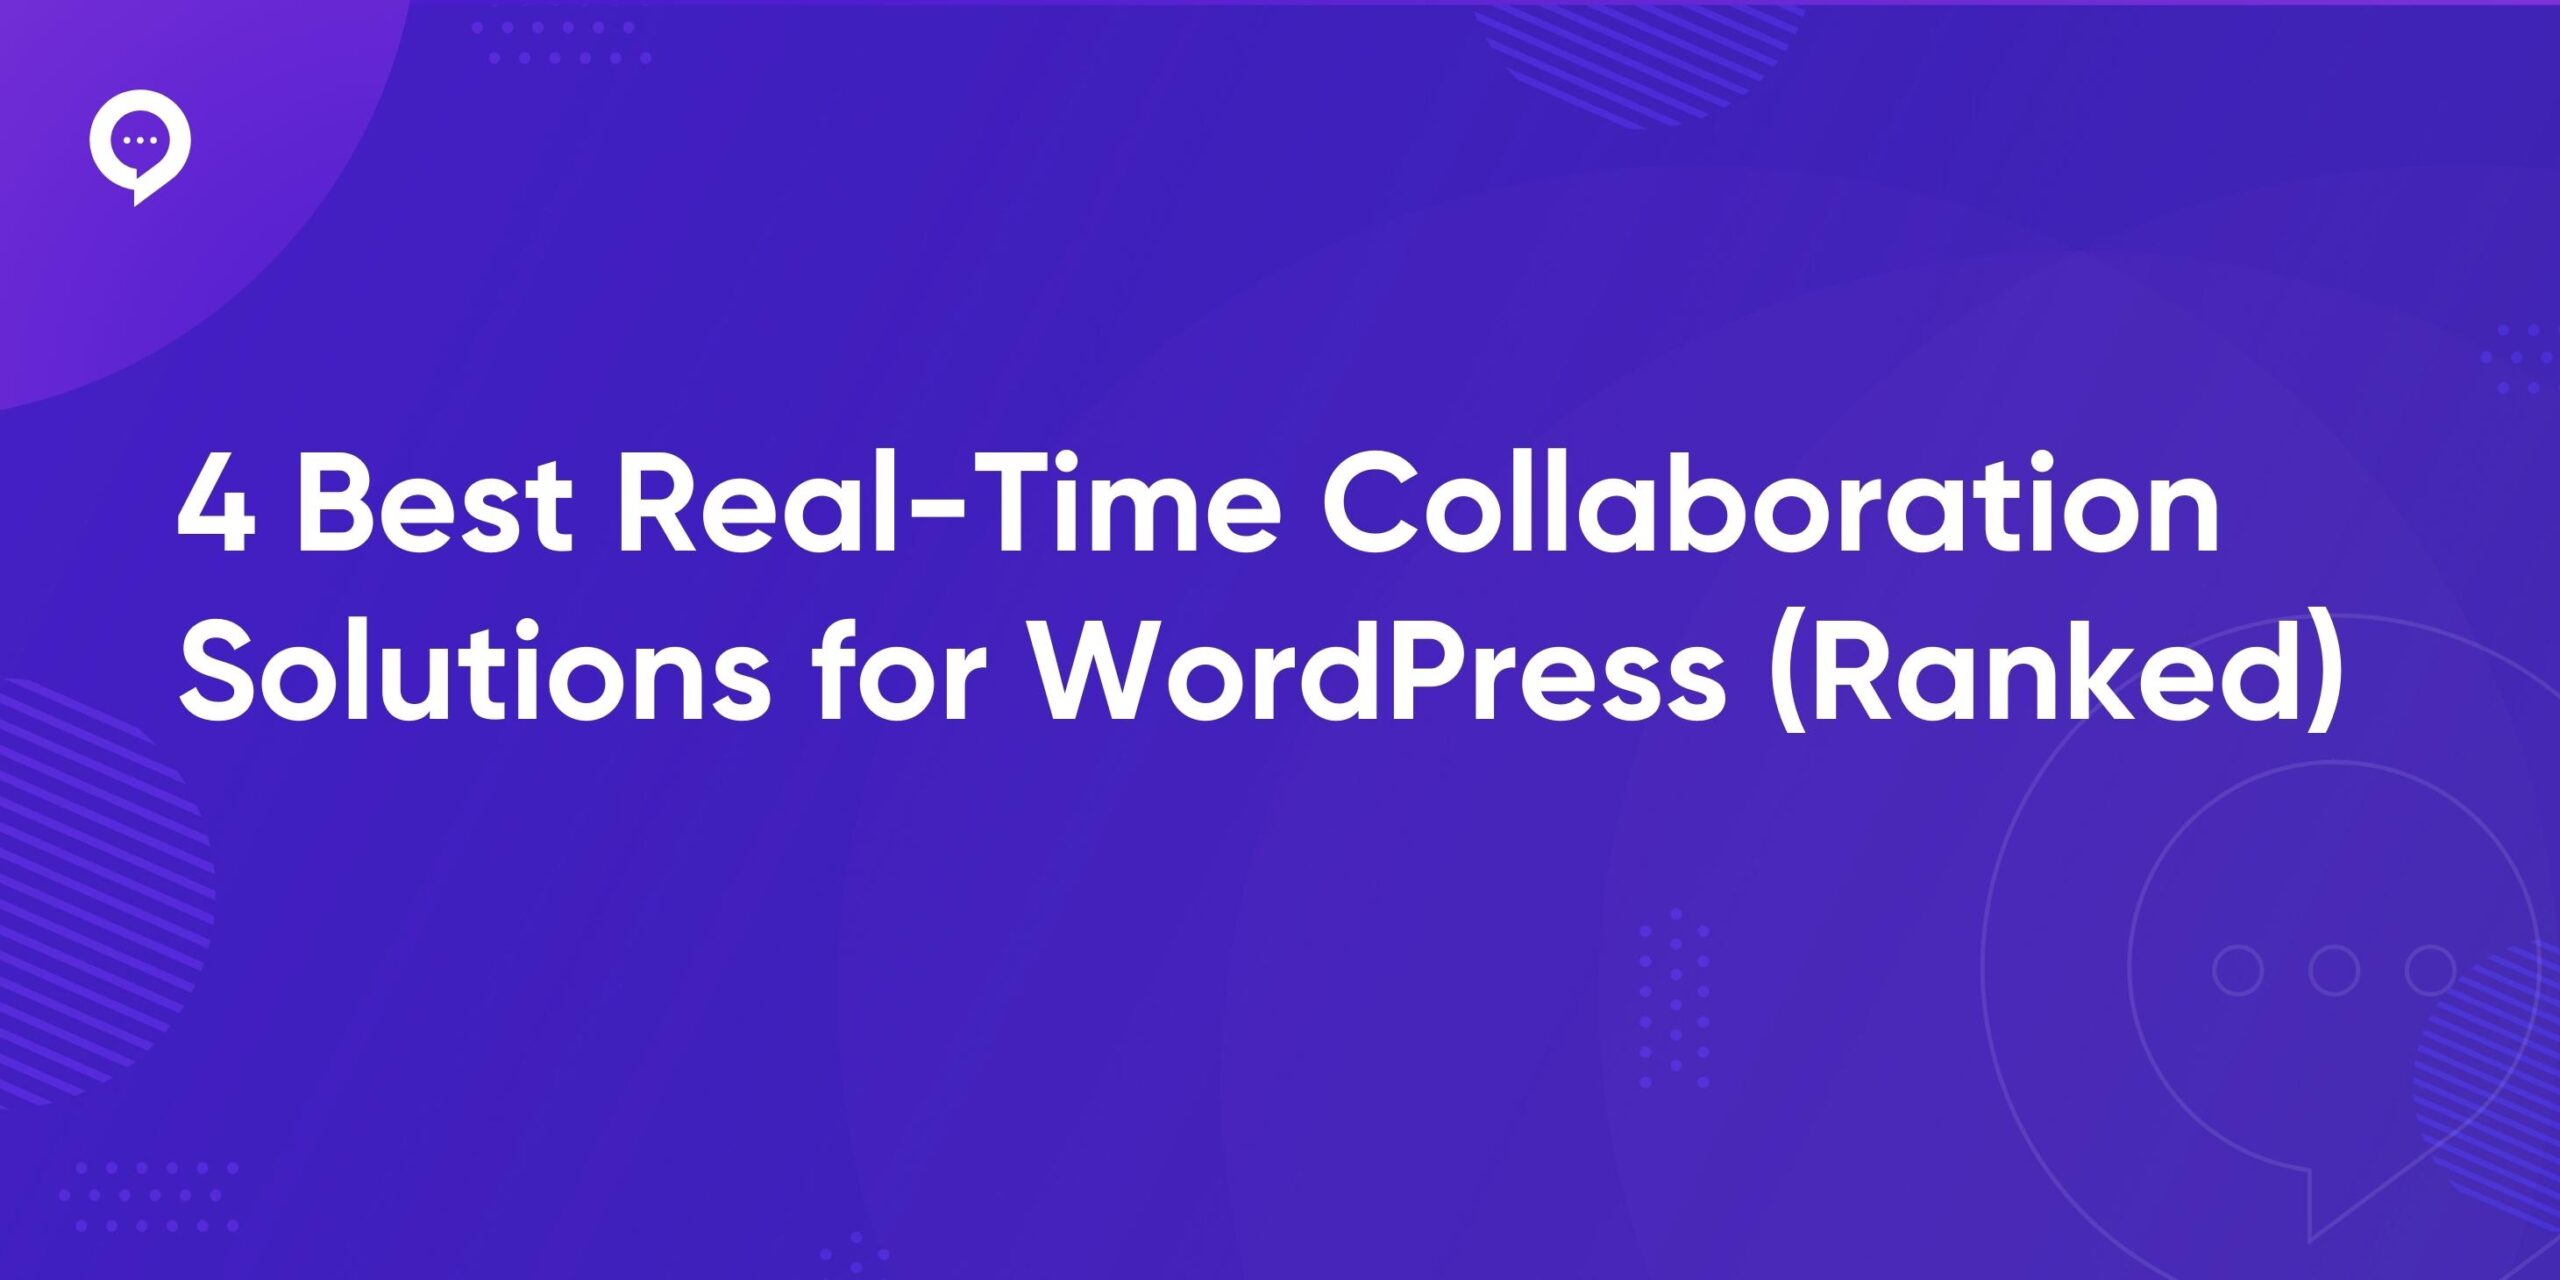 4 Best Real-Time Collaboration Solutions for WordPress (Ranked)